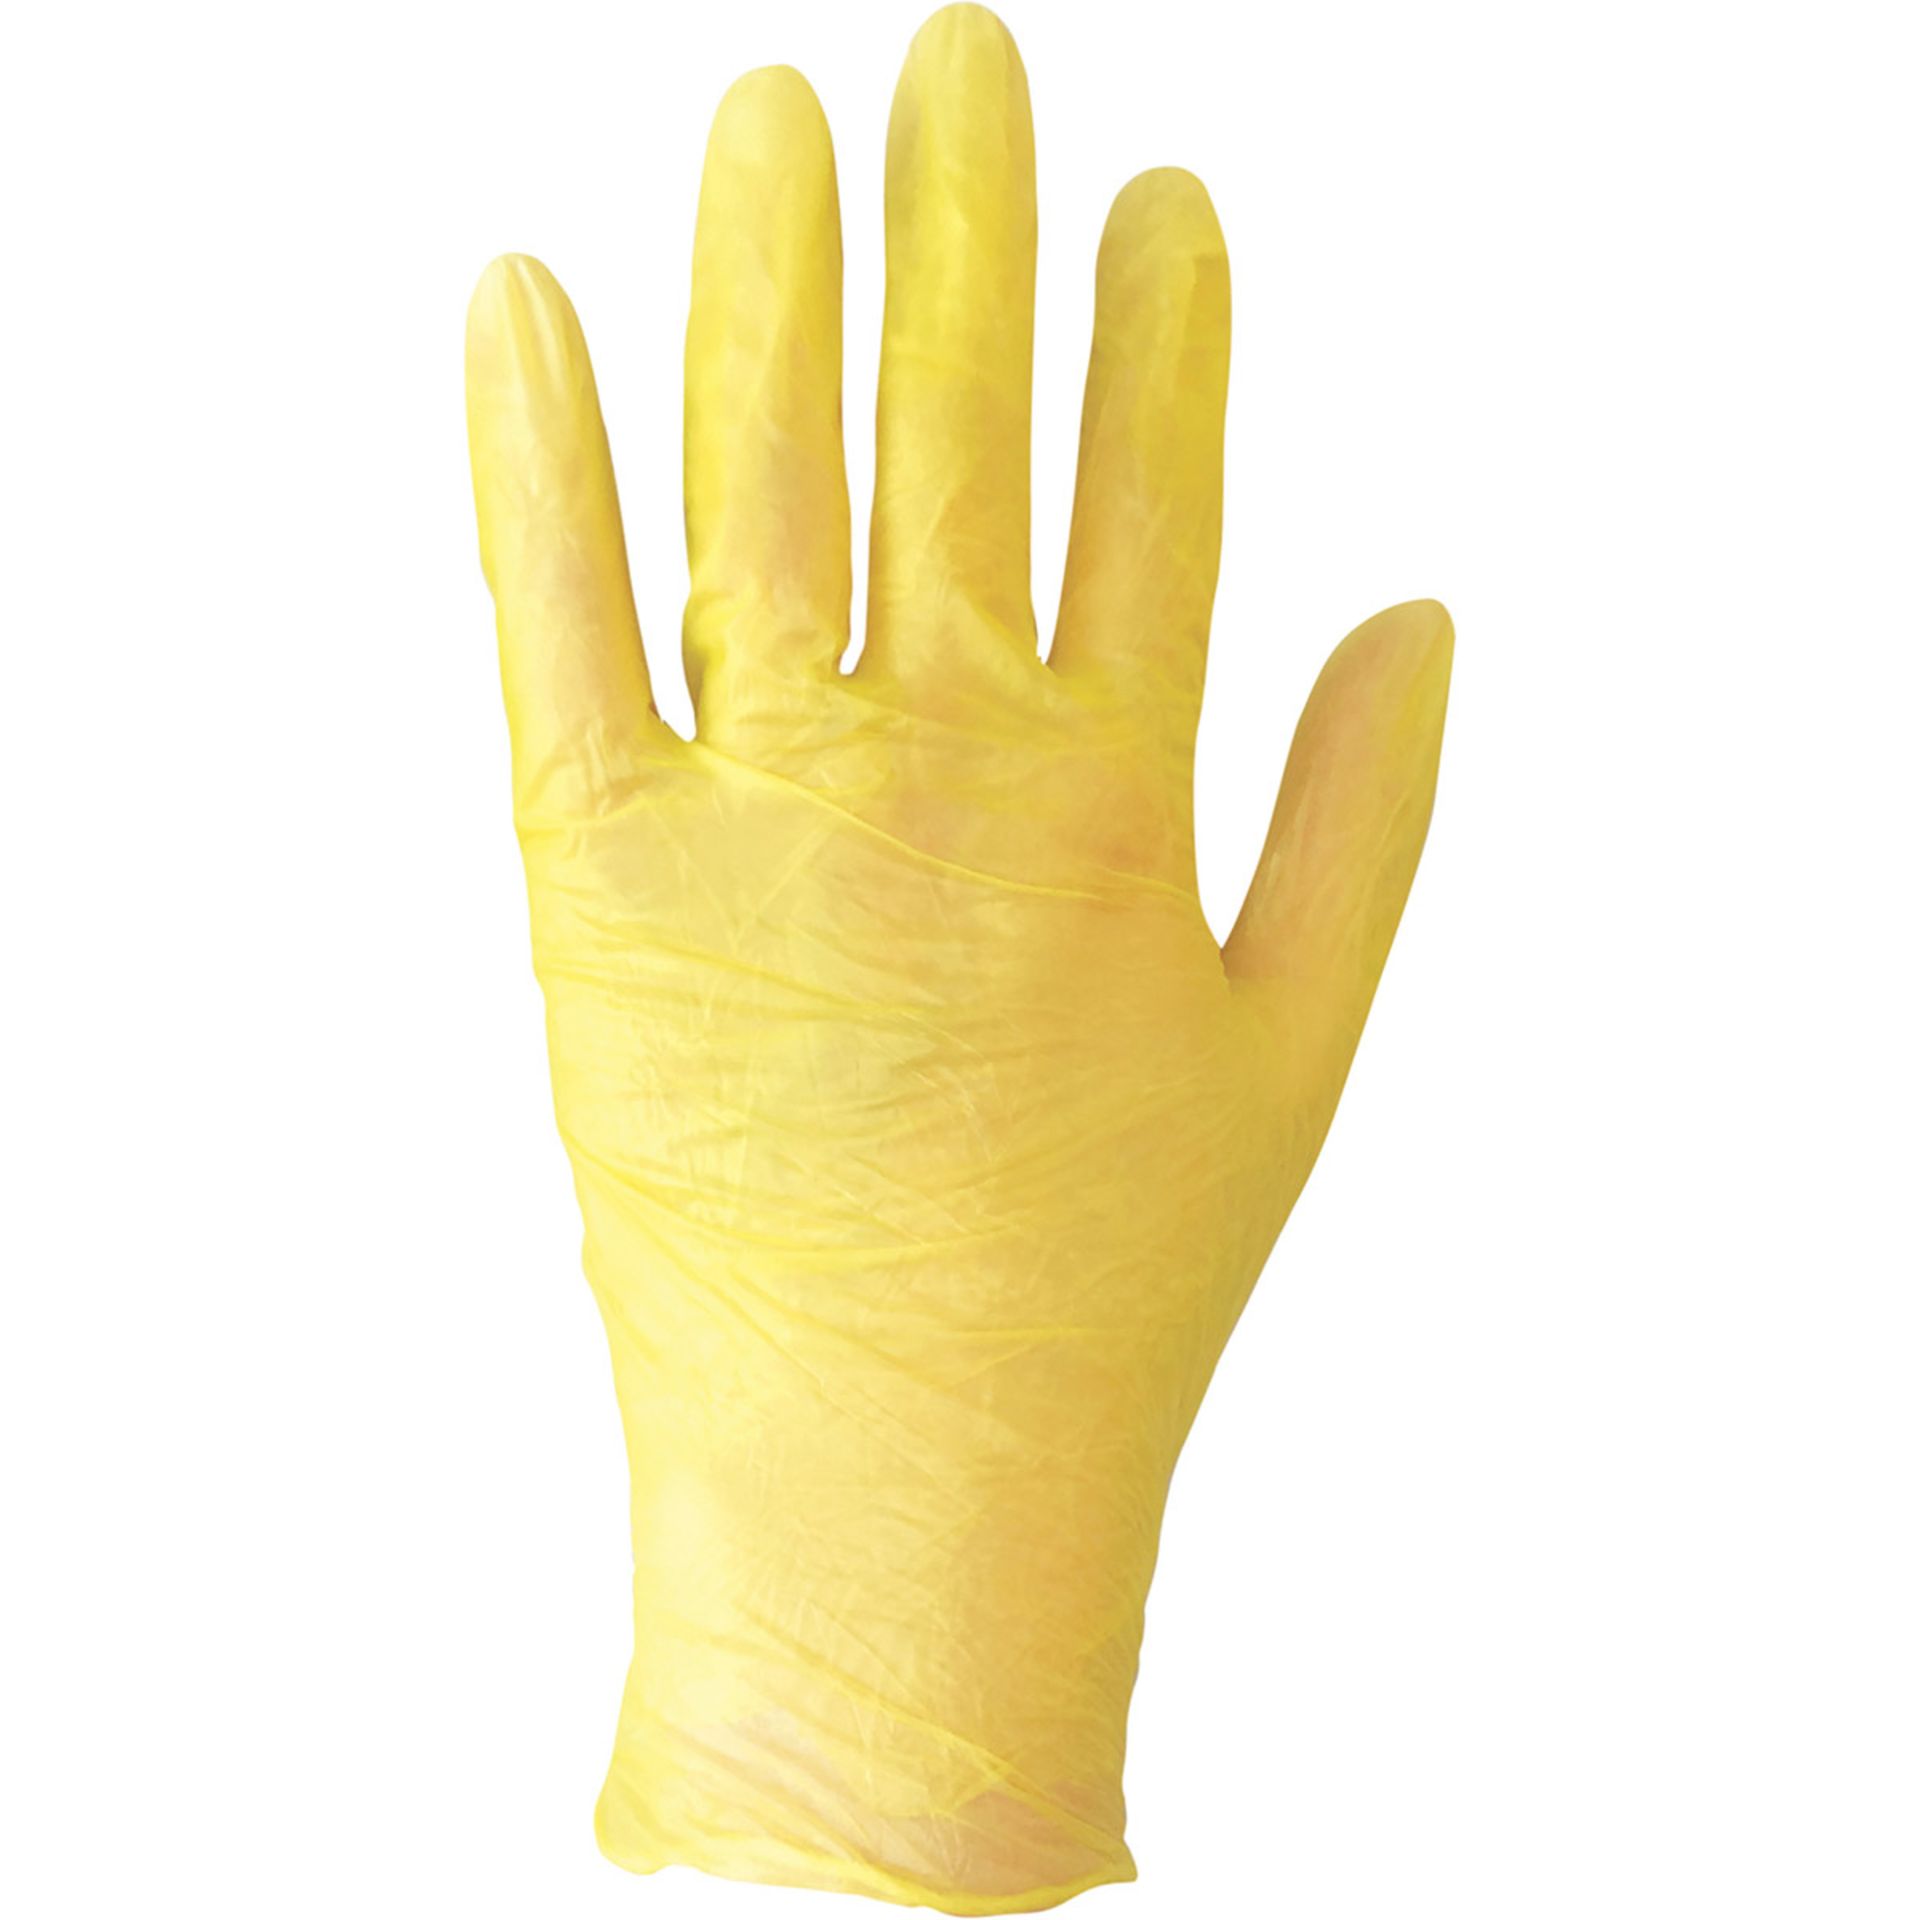 100 BOXES OF 100 YELLOW VINYL DISPOSABLE GLOVES